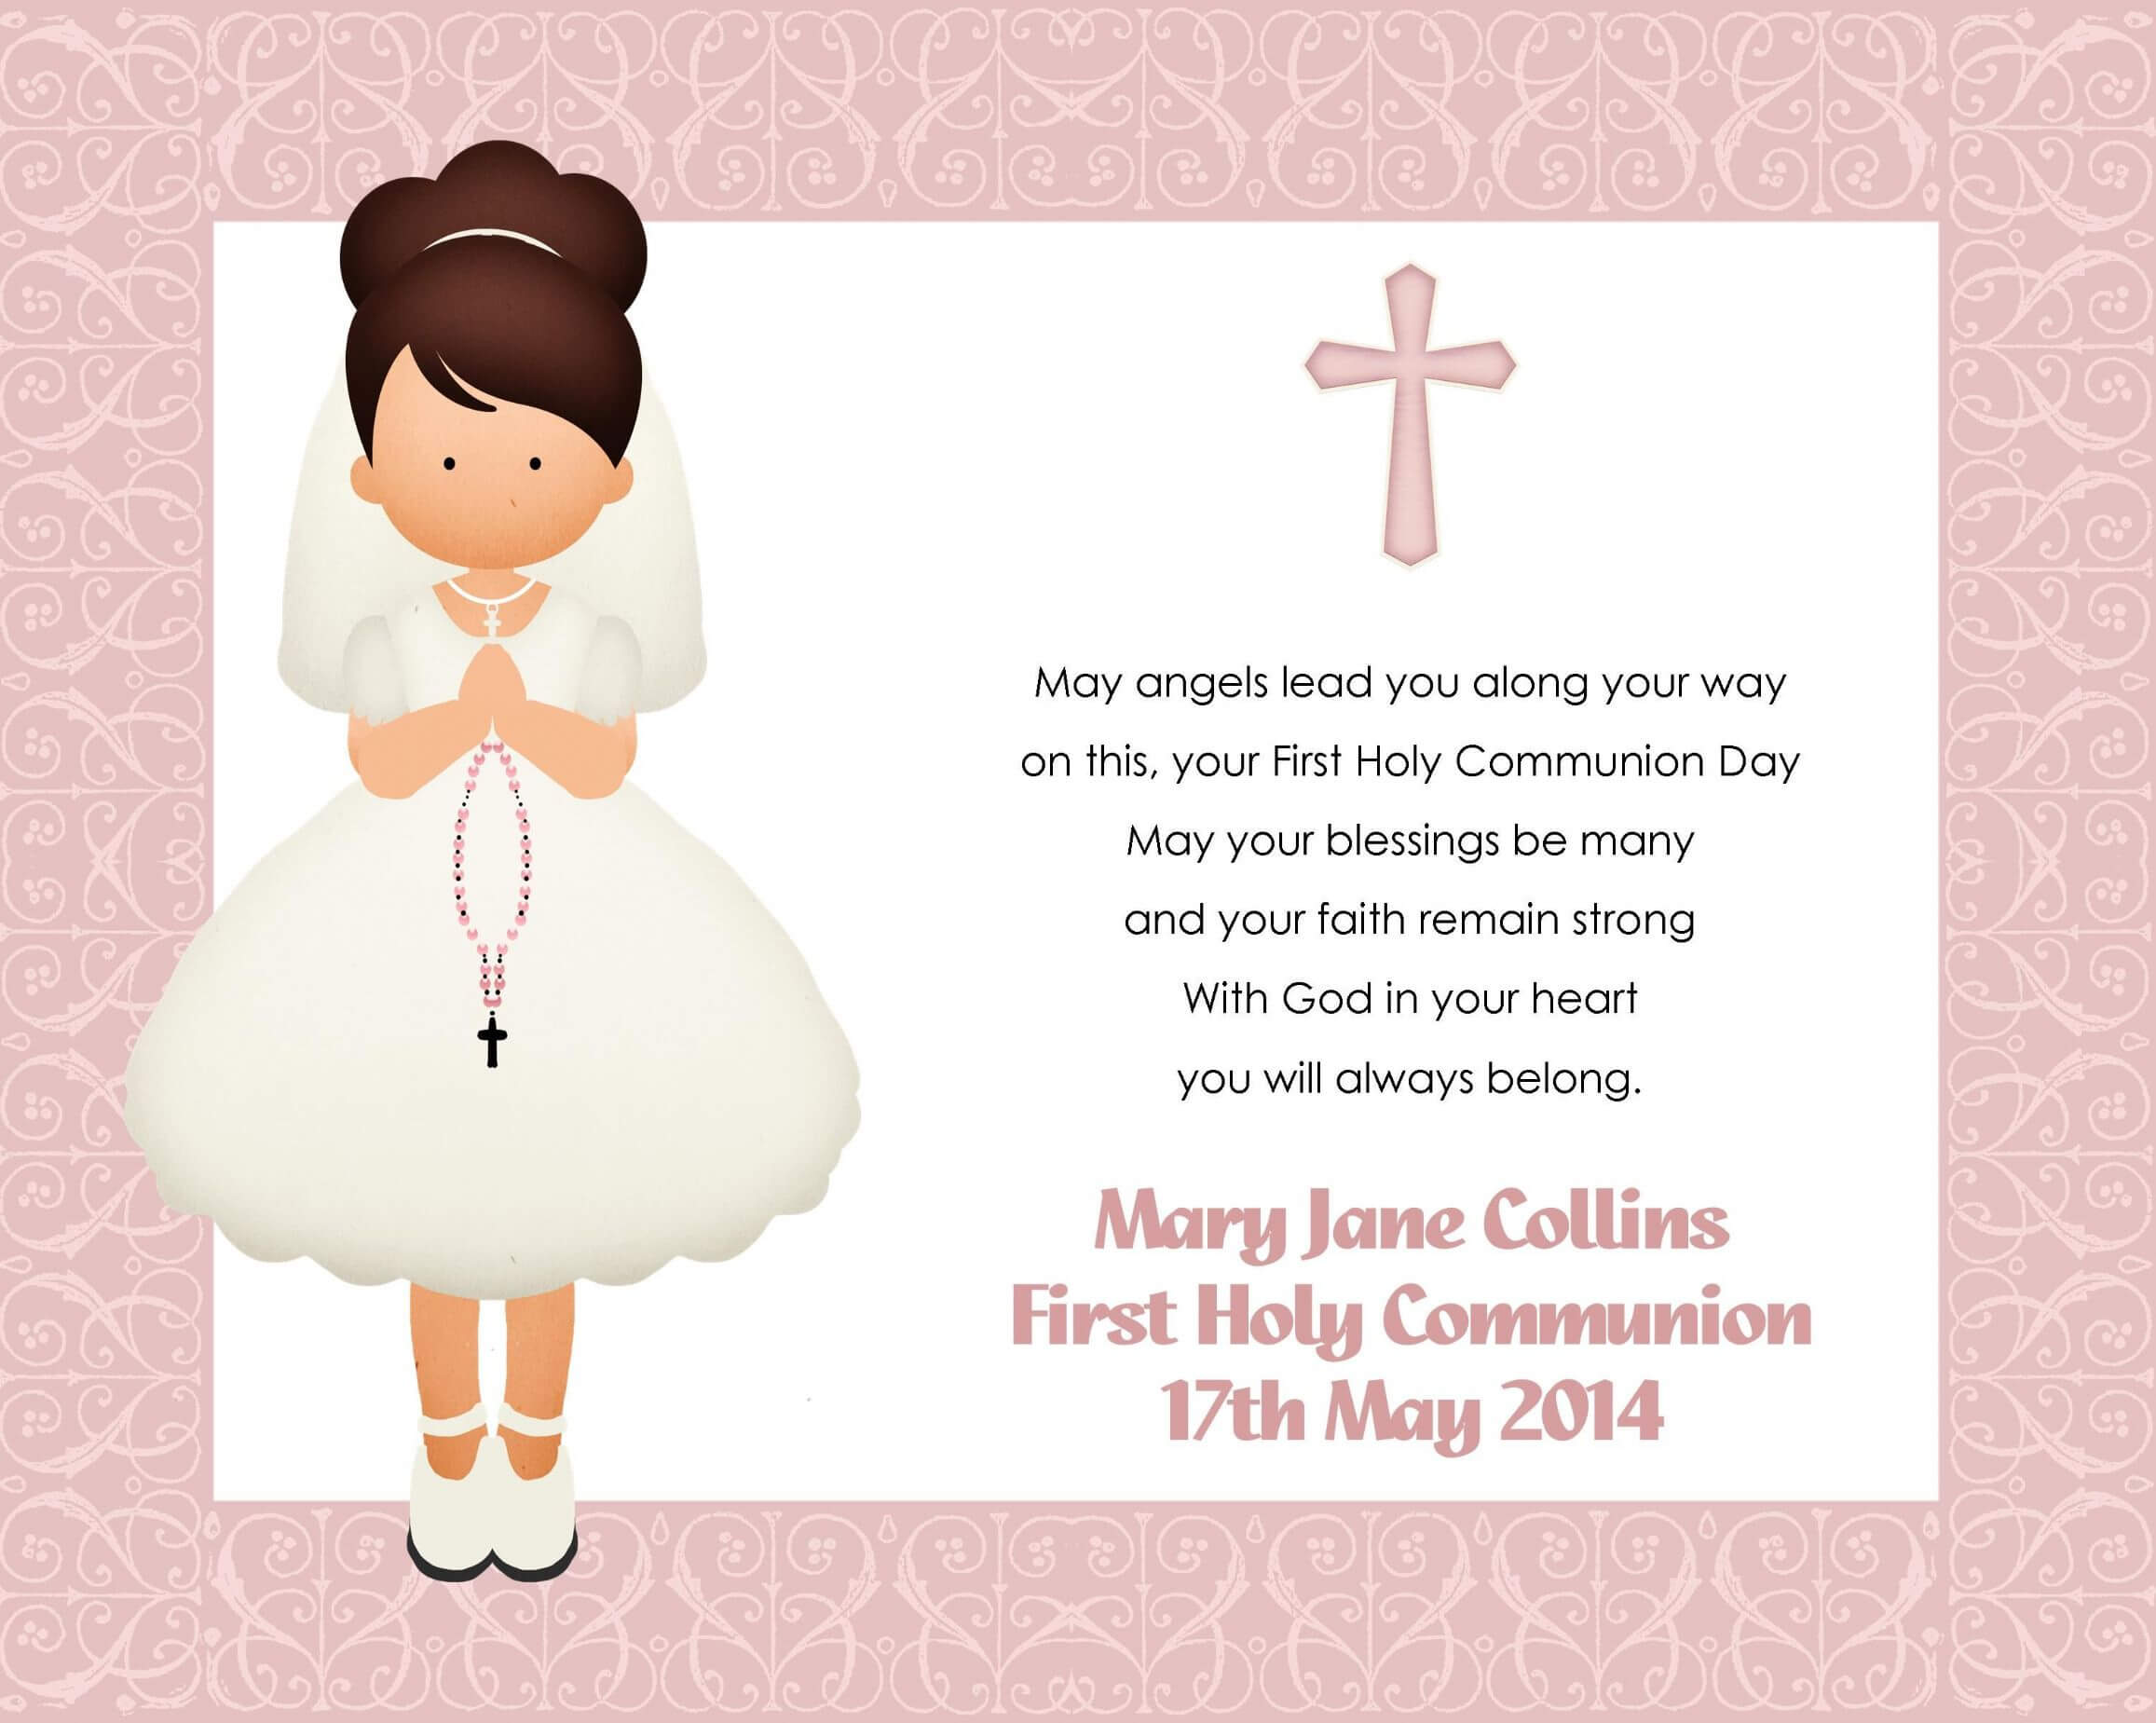 First Holy Communion Cards Printable Free That Are Regarding First Holy Communion Banner Templates